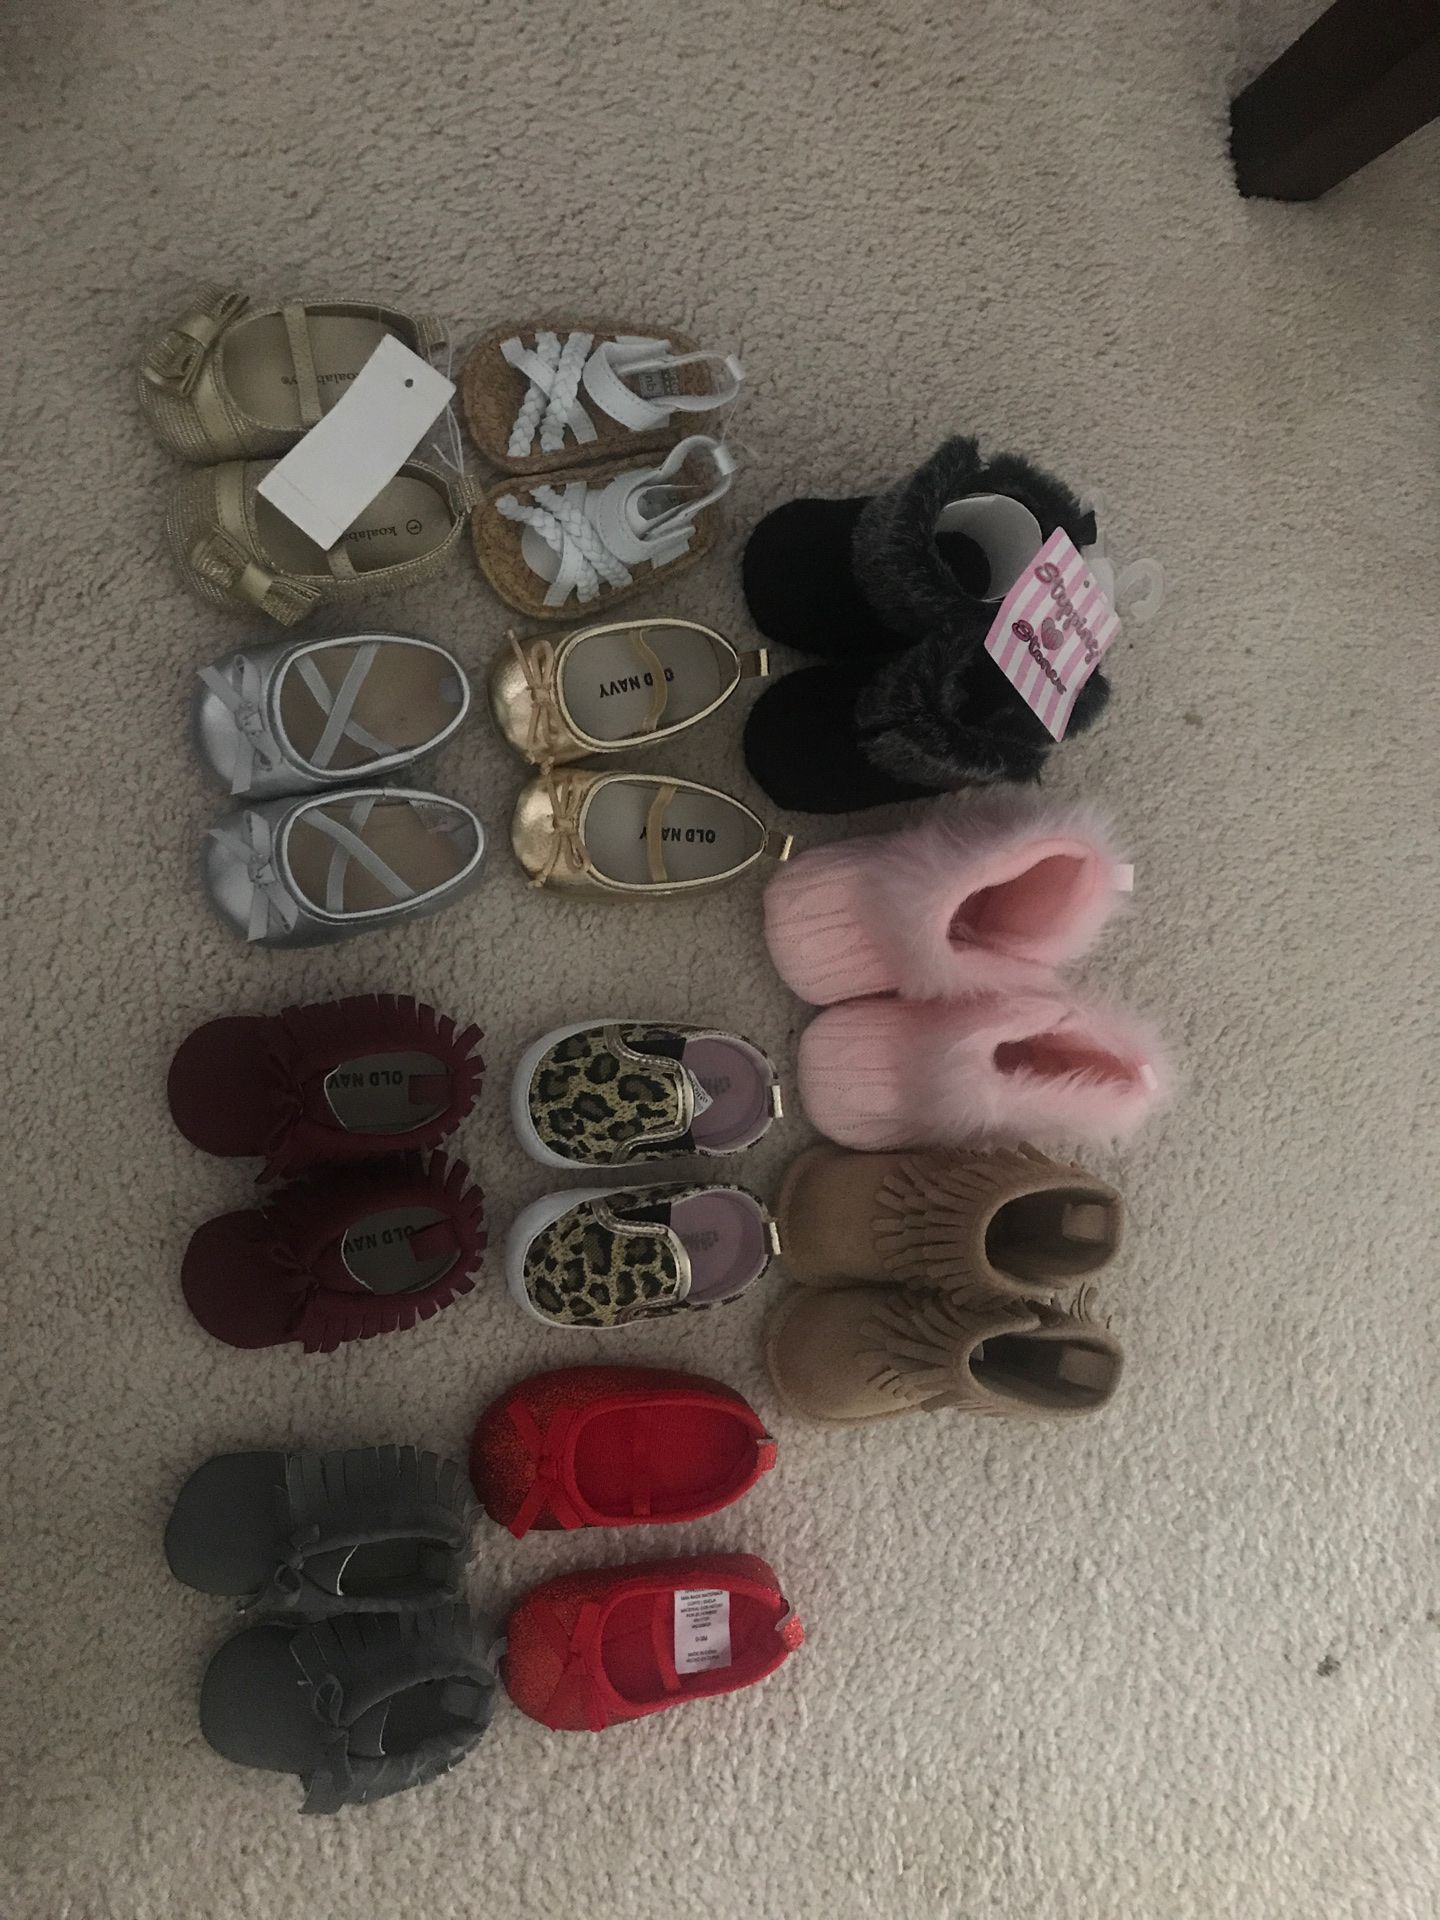 Baby girls shoes/boots